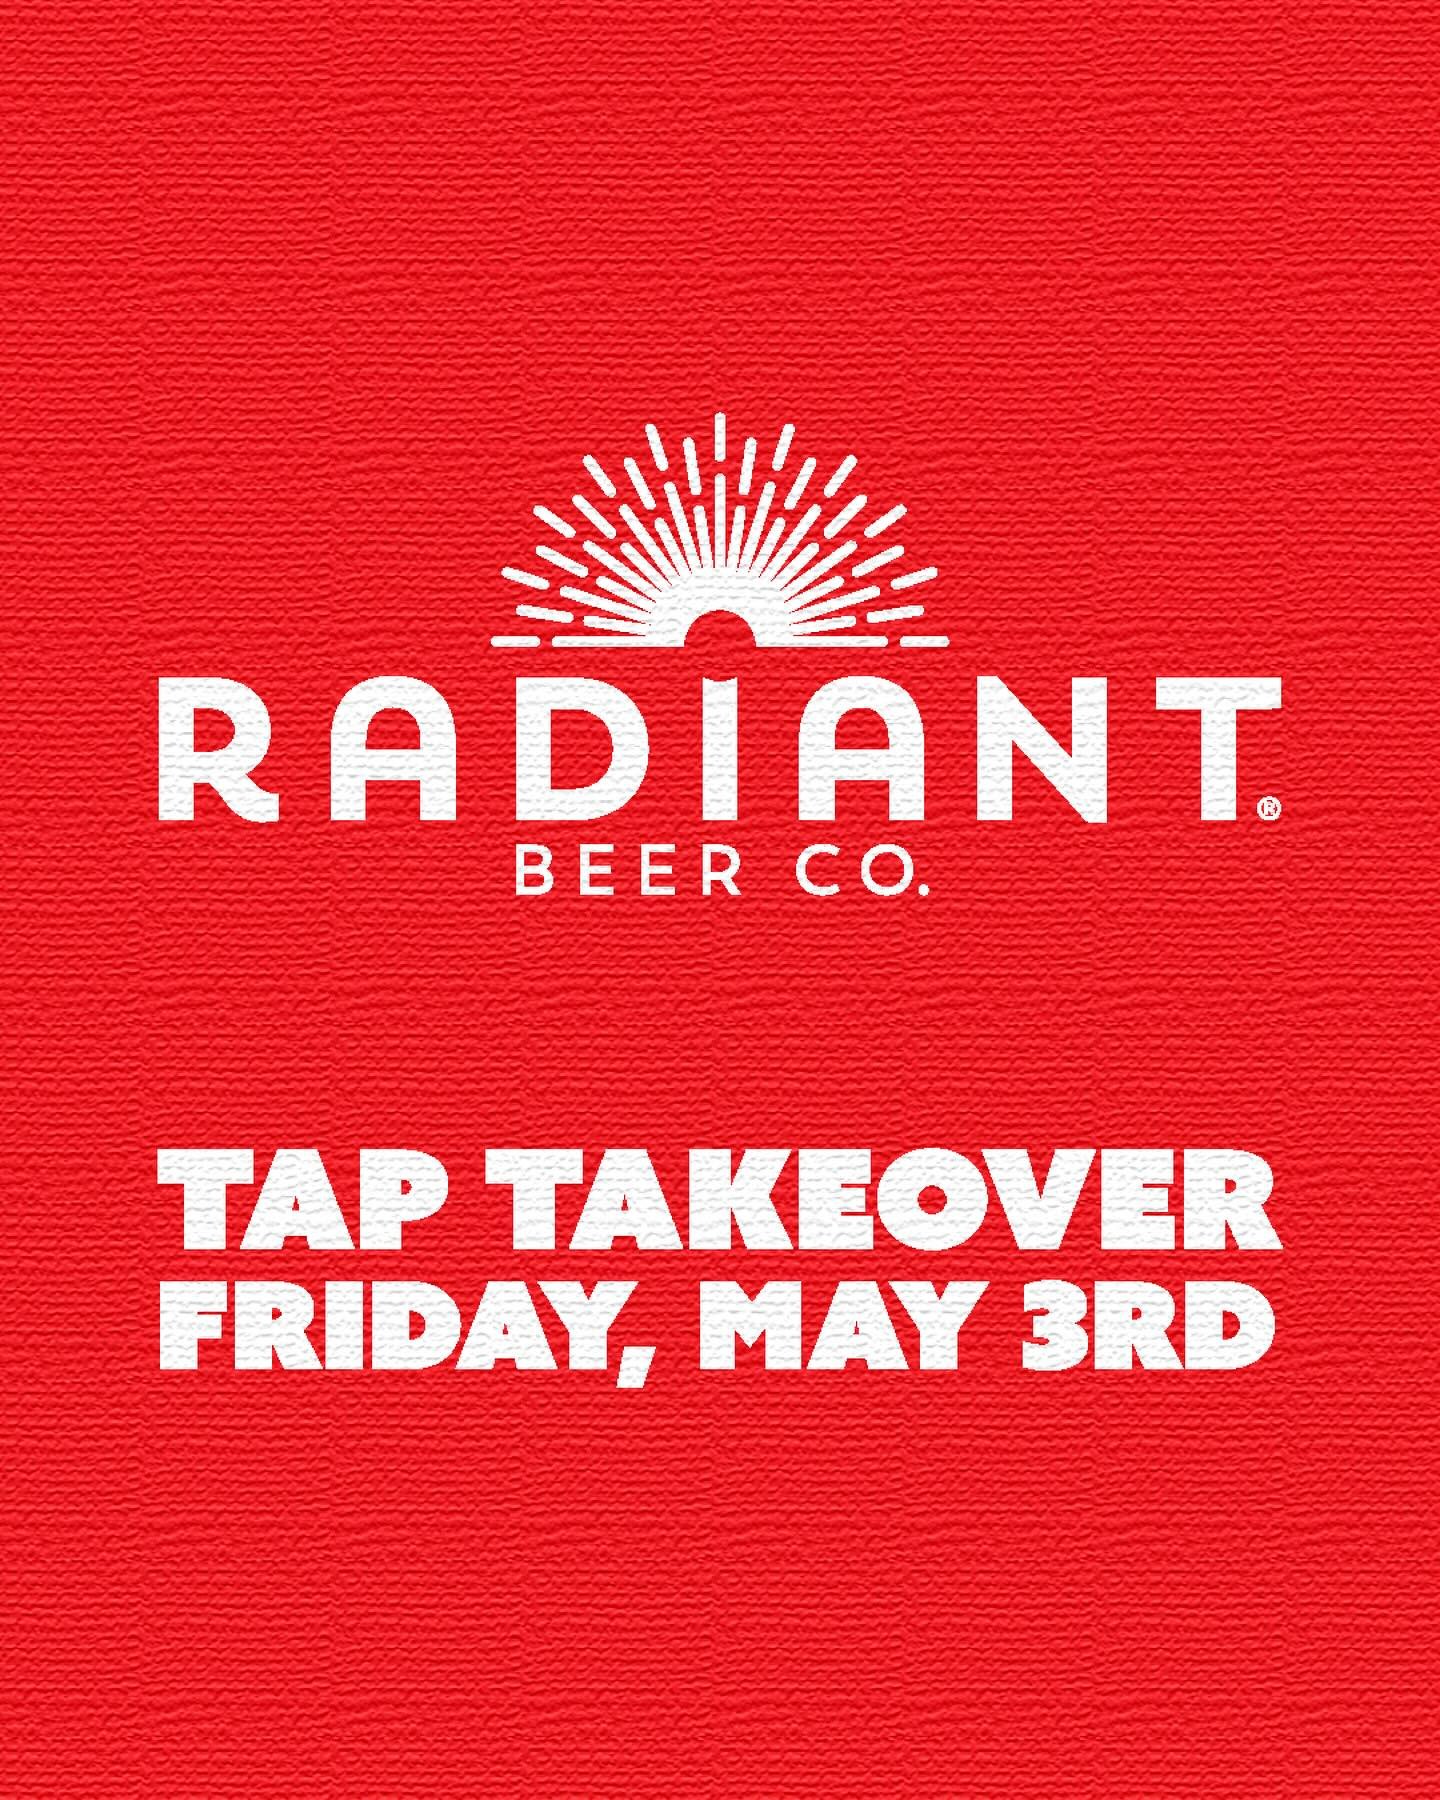 RADIANT BEER CO IS HERE TO LIGHT UP YOUR NIGHT 💡

Launch party with @radiantbeerco is going down today! Our sweet can selection from them is ready for ya now! Come and get it! 🍻